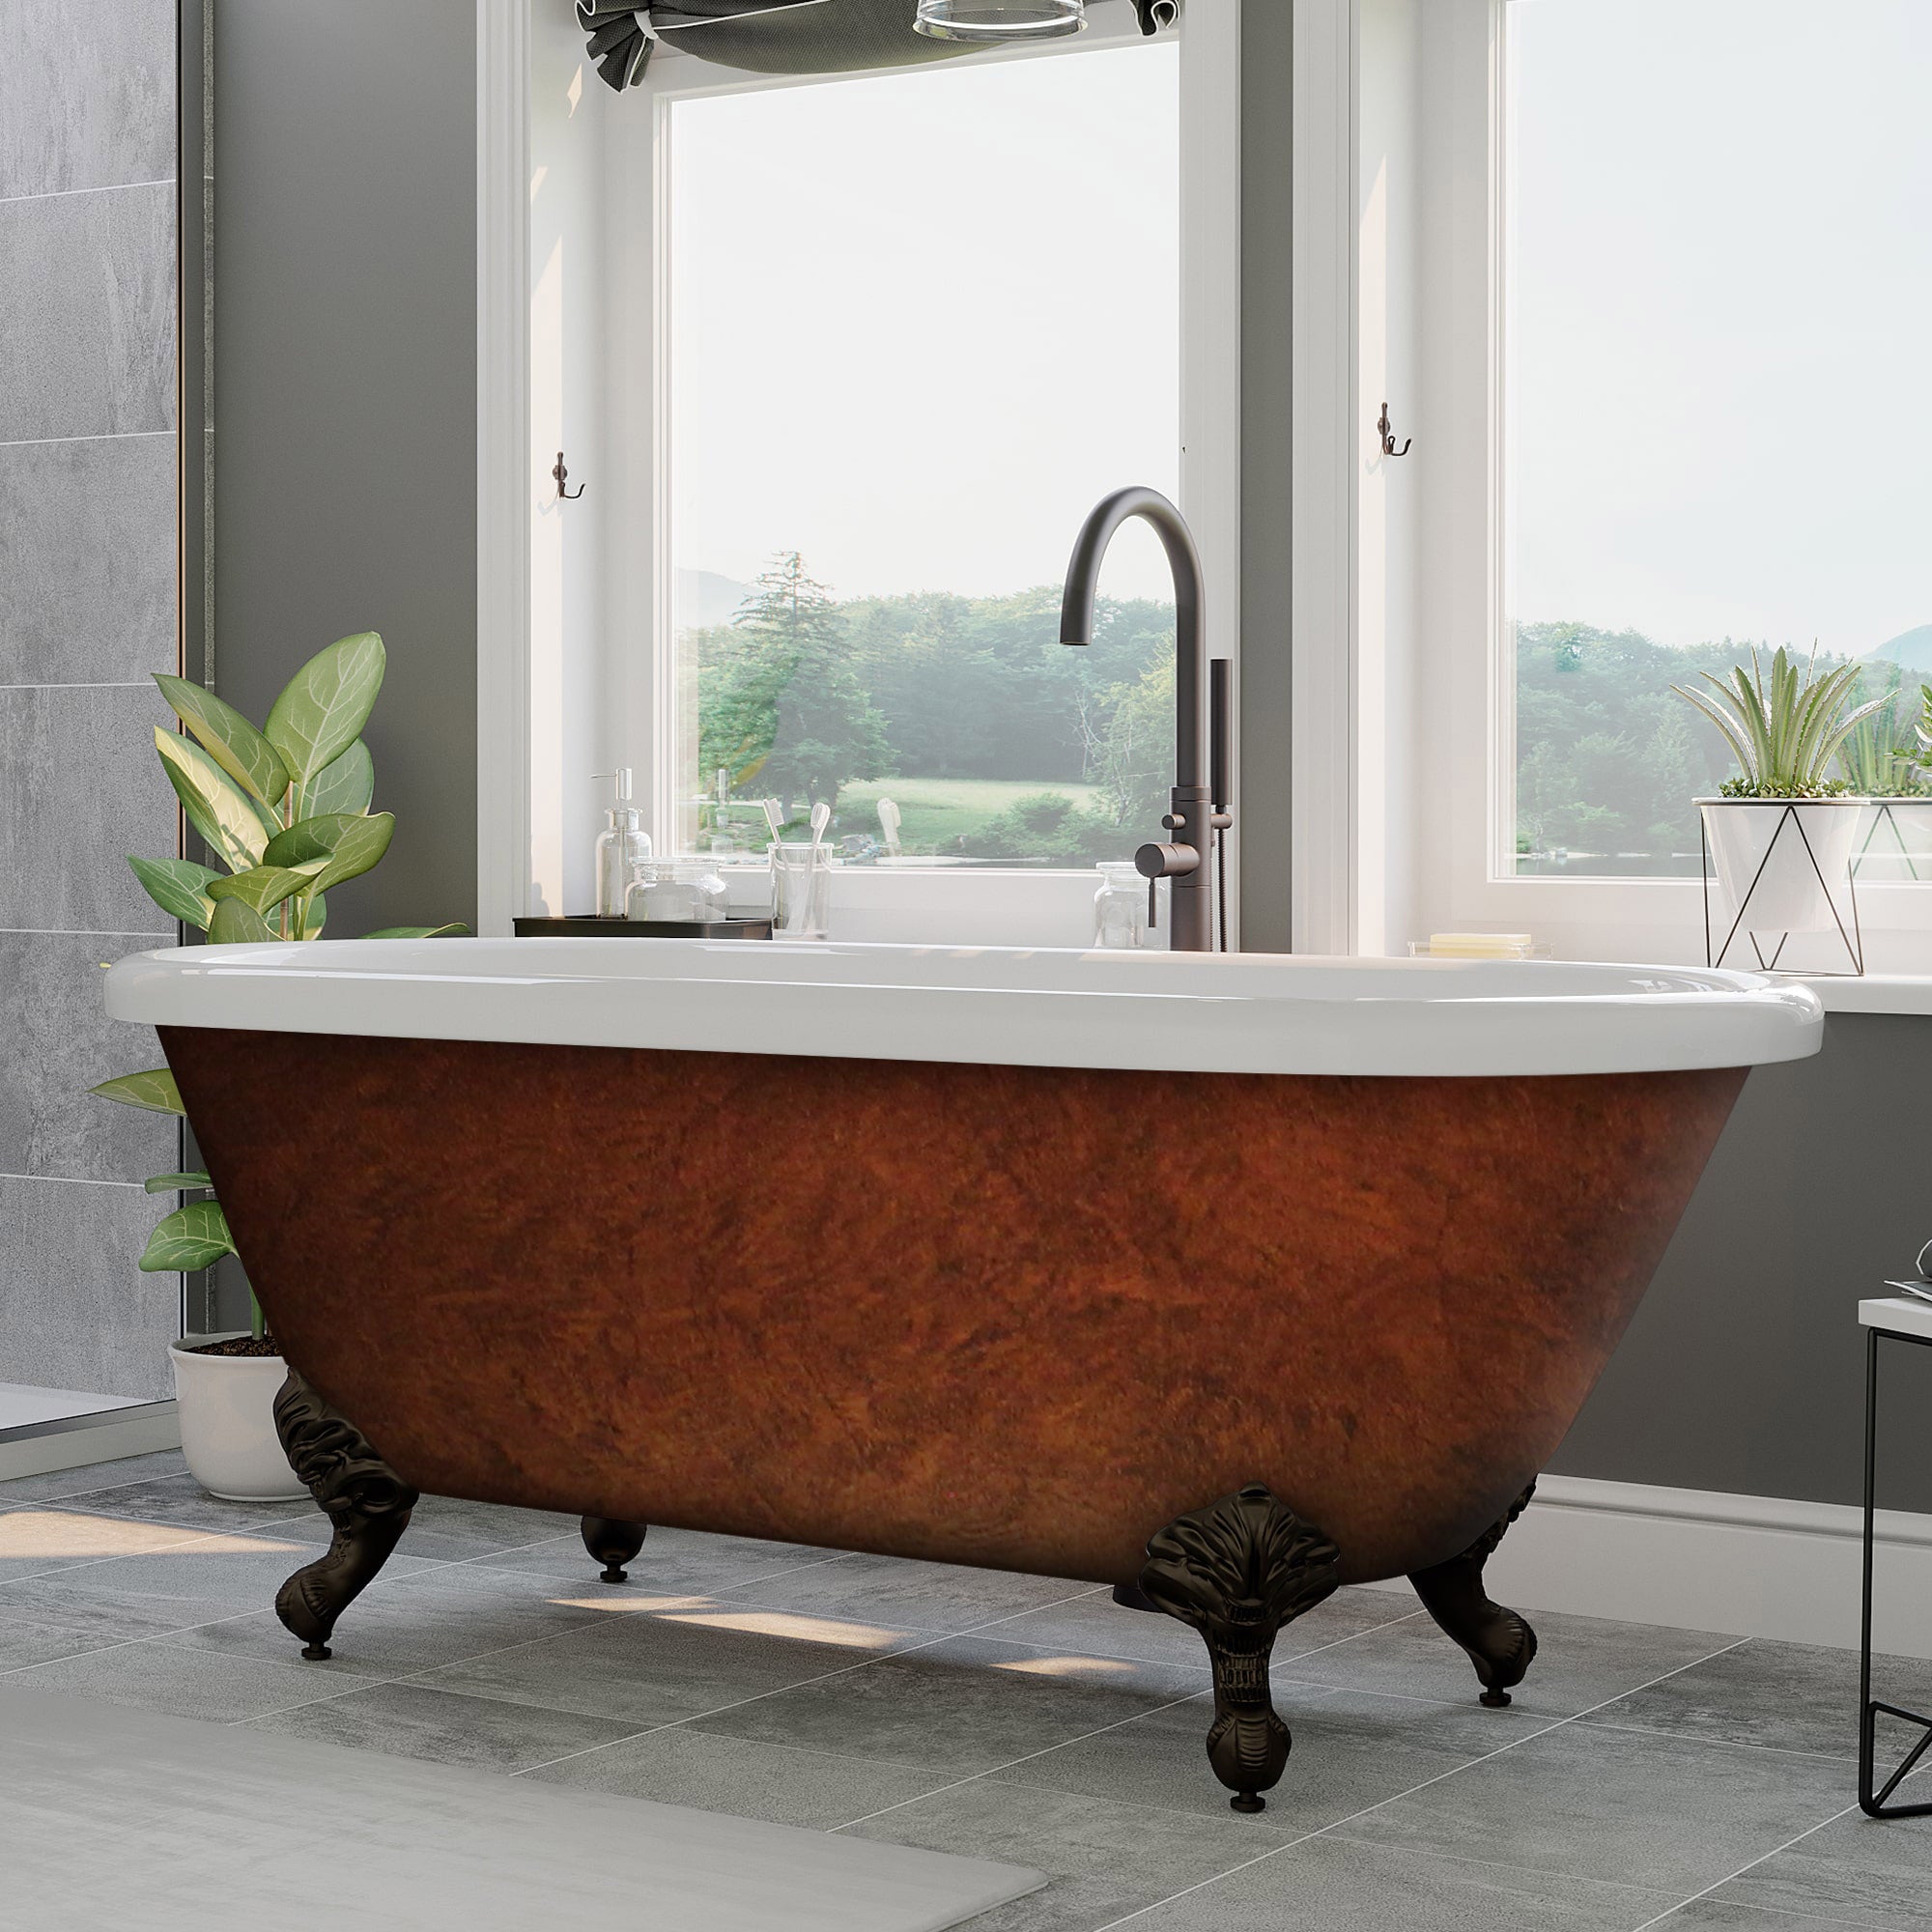 Cambridge Plumbing Double Ended Hand Painted Acrylic Clawfoot Soaking Bathtub (Fiberglass Core, Interior White Gloss Finish & ﻿Hand Painted Faux Copper Bronze Finish) ADE-NH-ORB-CB - Vital Hydrotherapy